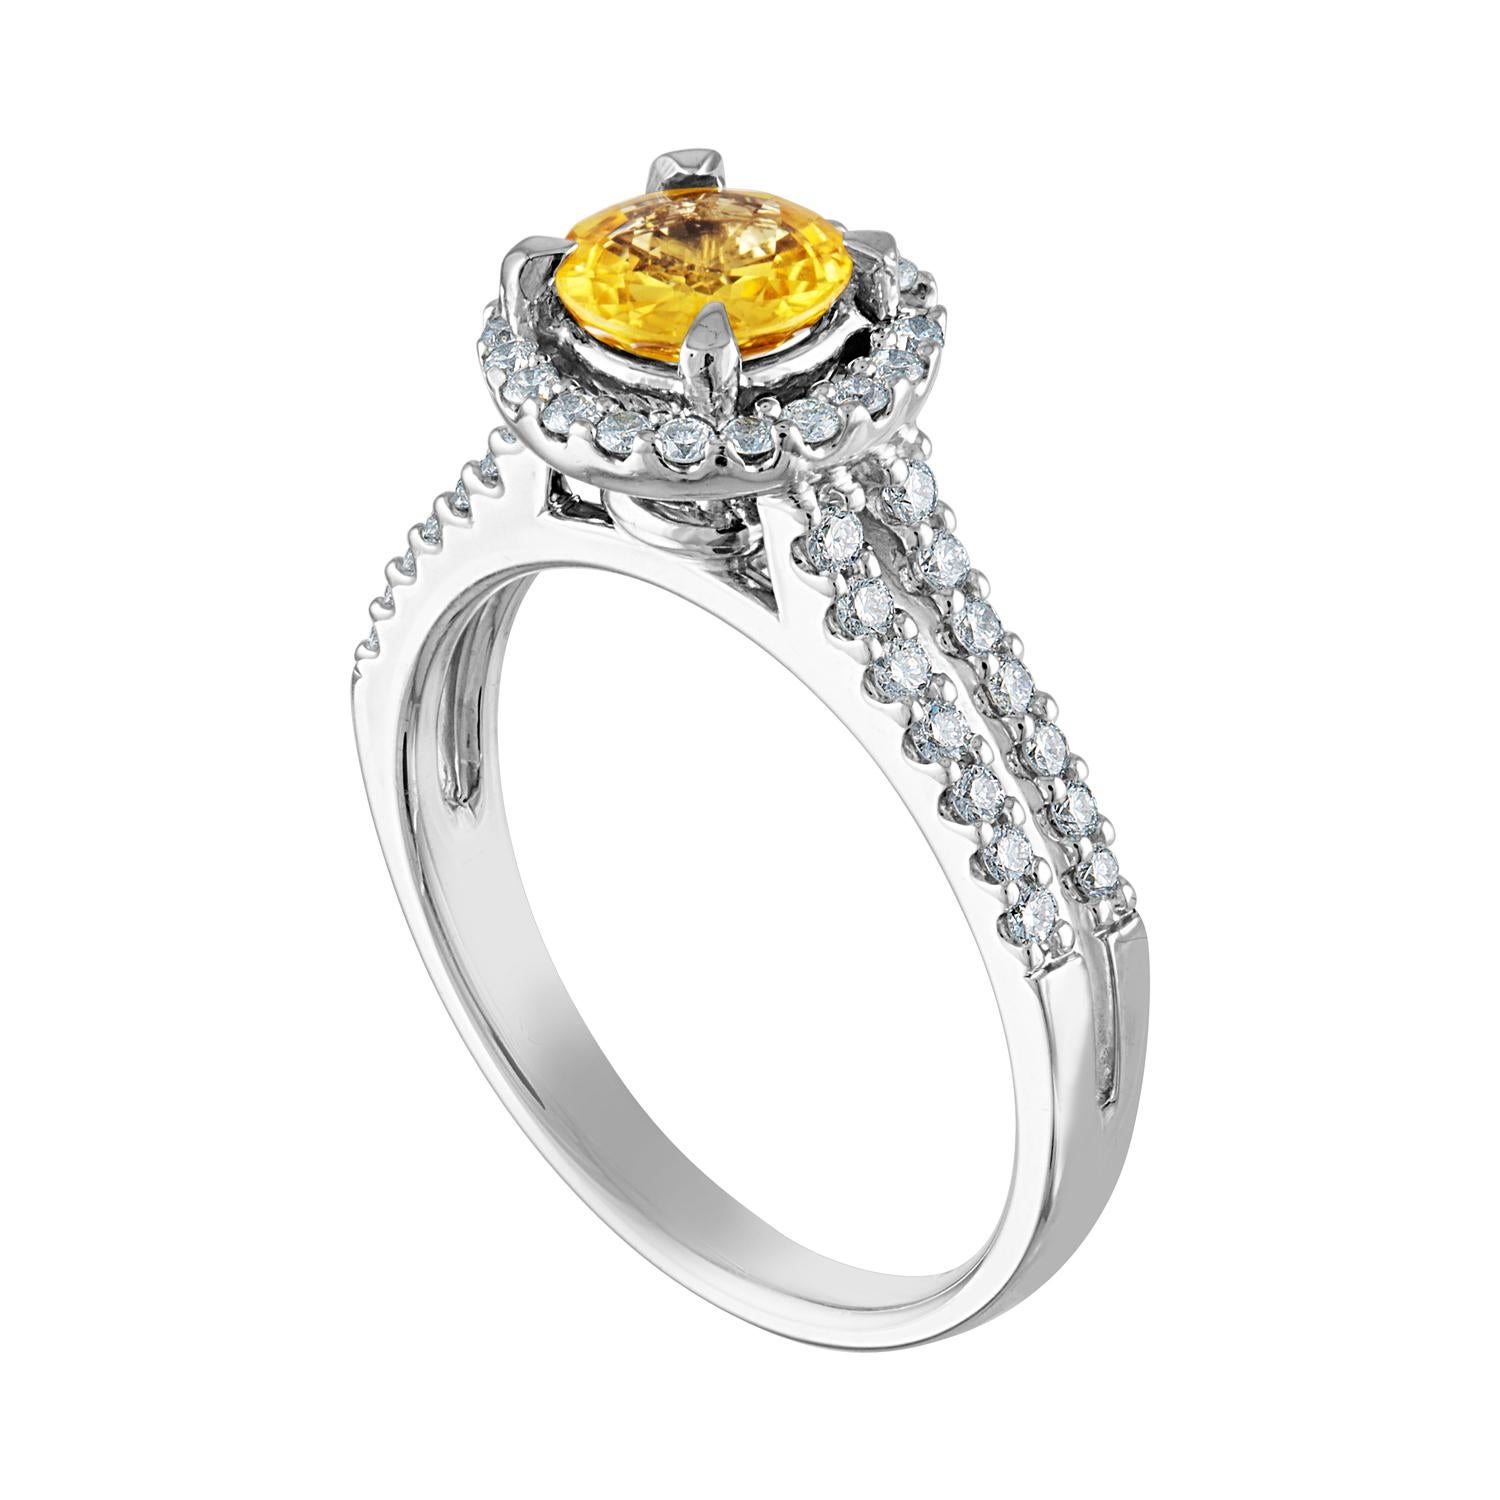 Beautiful Halo Ring
The ring is 18K White Gold
The Center Stone is a Round Yellow Sapphire 0.84 Carats
The Sapphire is AGL Certified Heated
There are 0.41 Carats in Diamonds F/G VS/SI
The ring is a size 6.5, sizable.
The ring weighs 5.3 grams